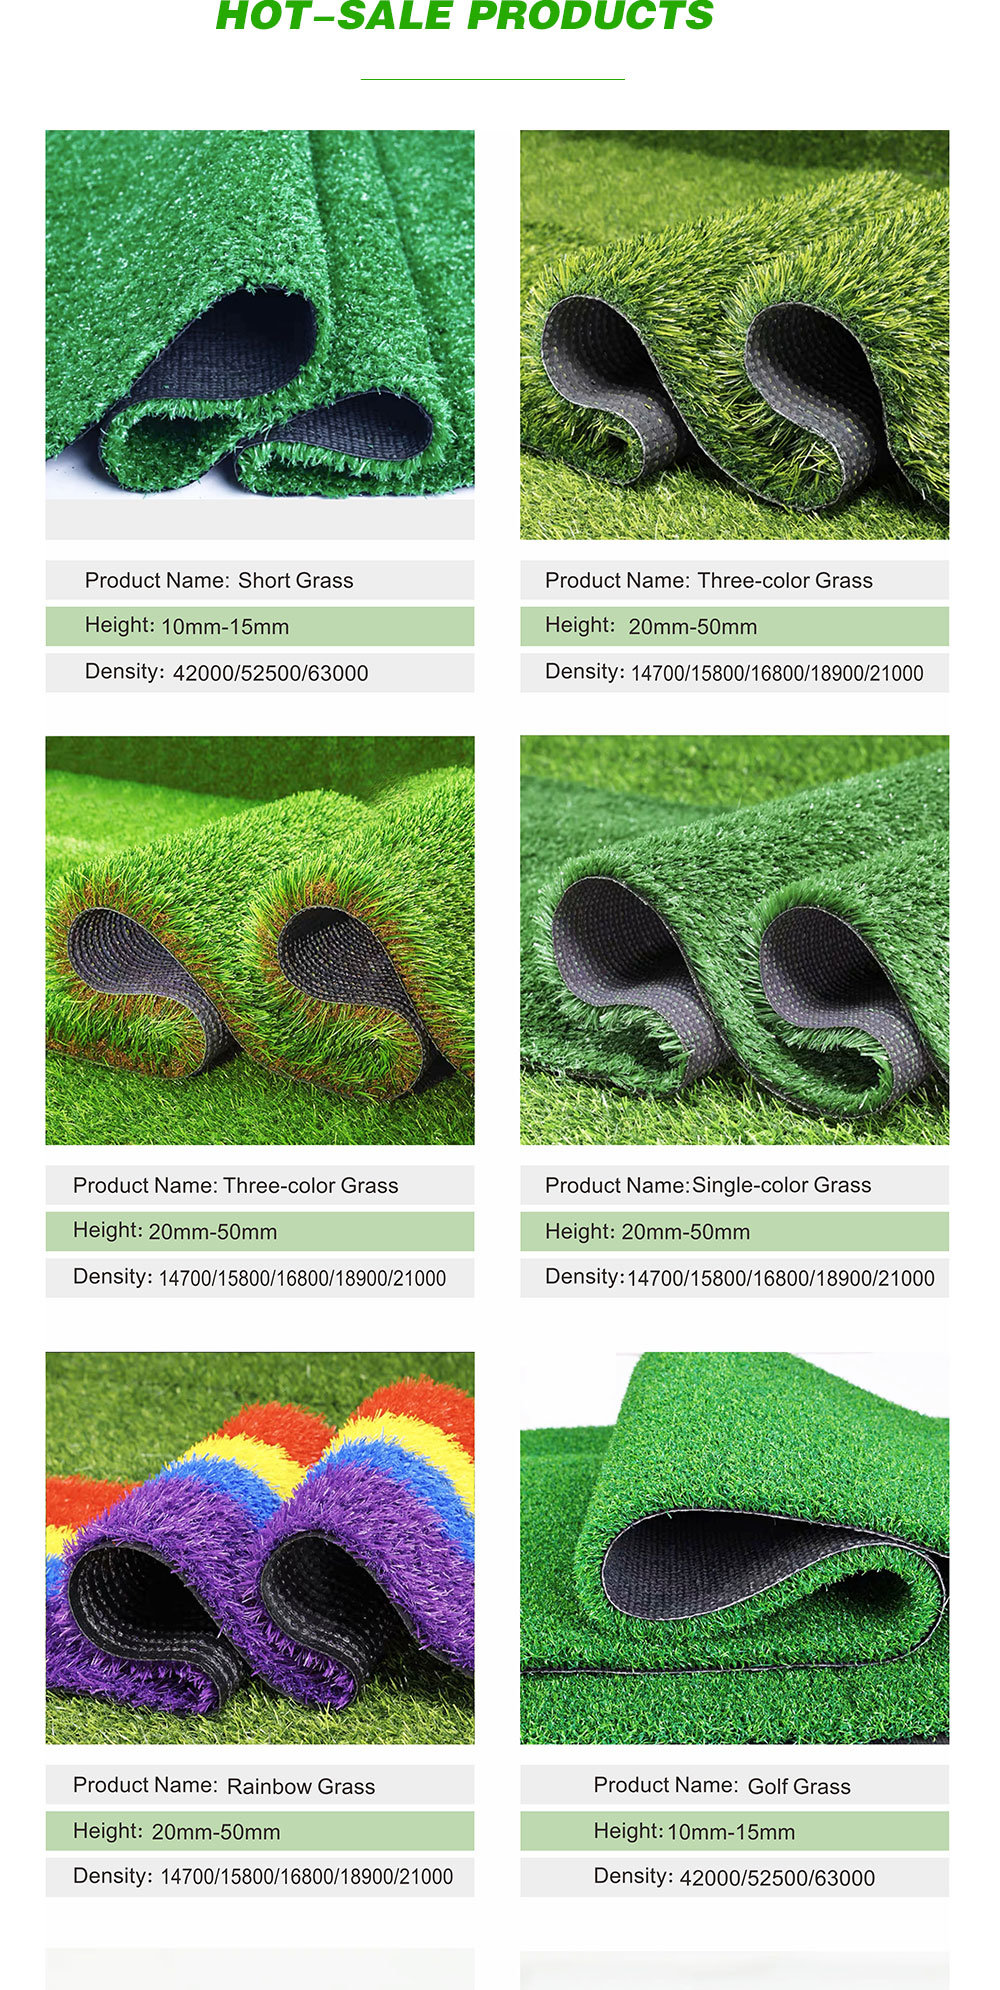 3/16 Inch Flat Type Lw Plastic Woven Bags Artificial Plants Syntheic Turf